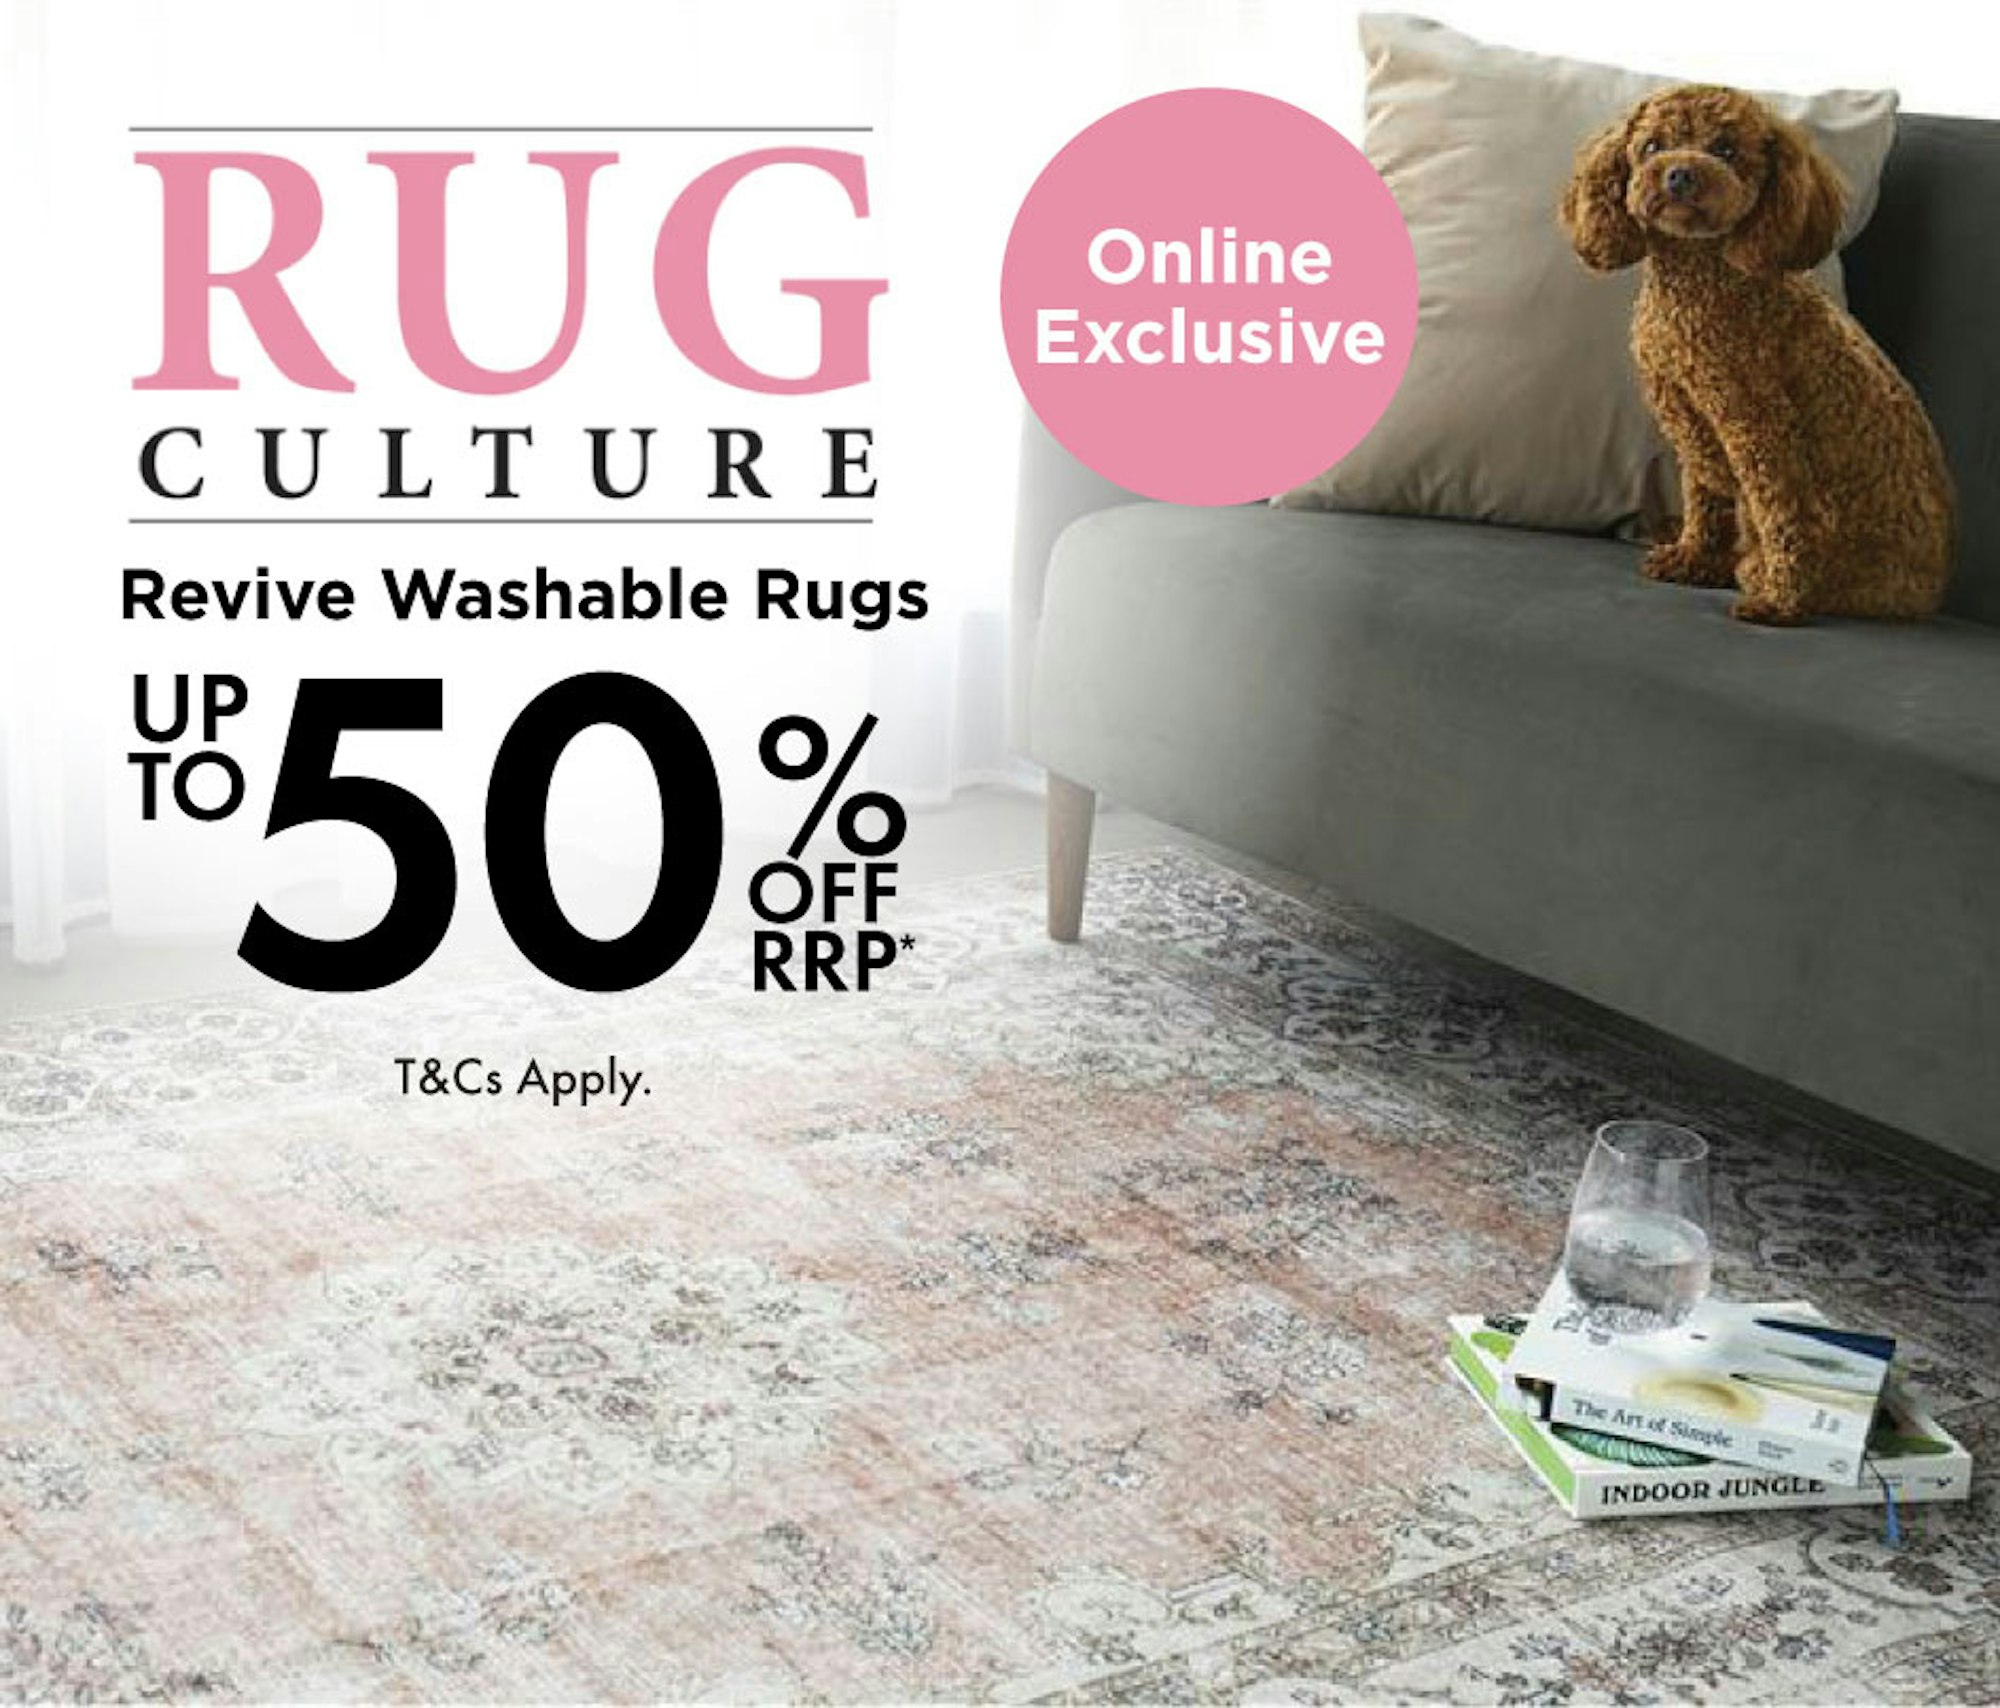 RUG CULTURE WASHABLE RUGS